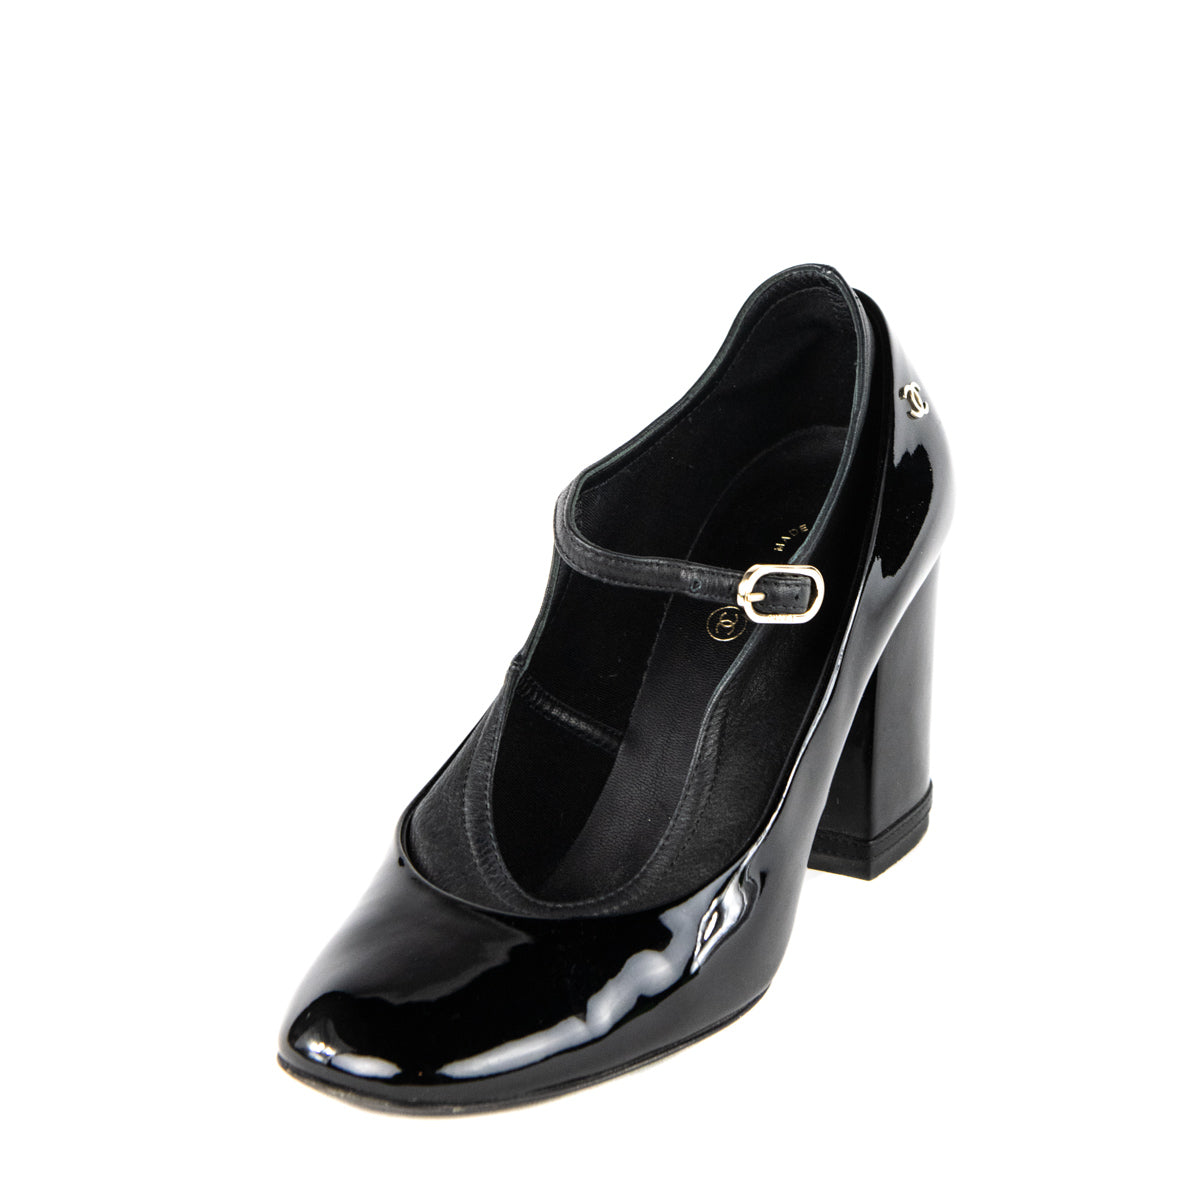 Chanel Black Patent Leather Mary Janes Pumps - Designer Shoes Canada